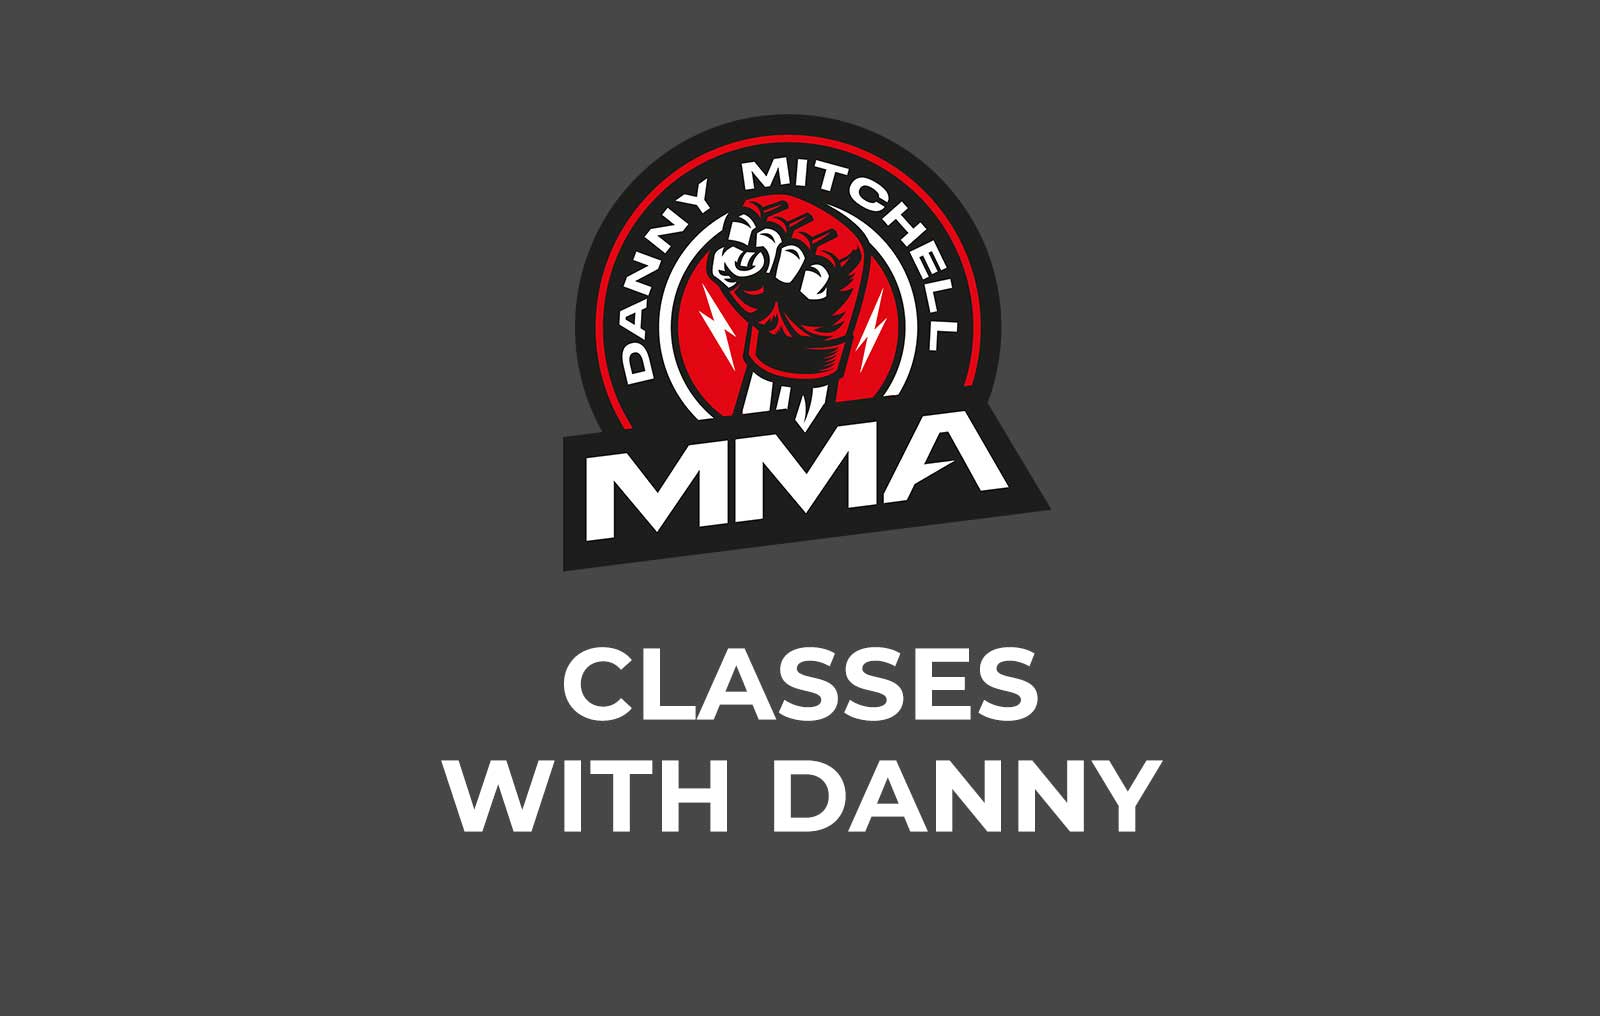 CLASSES WITH DANNY